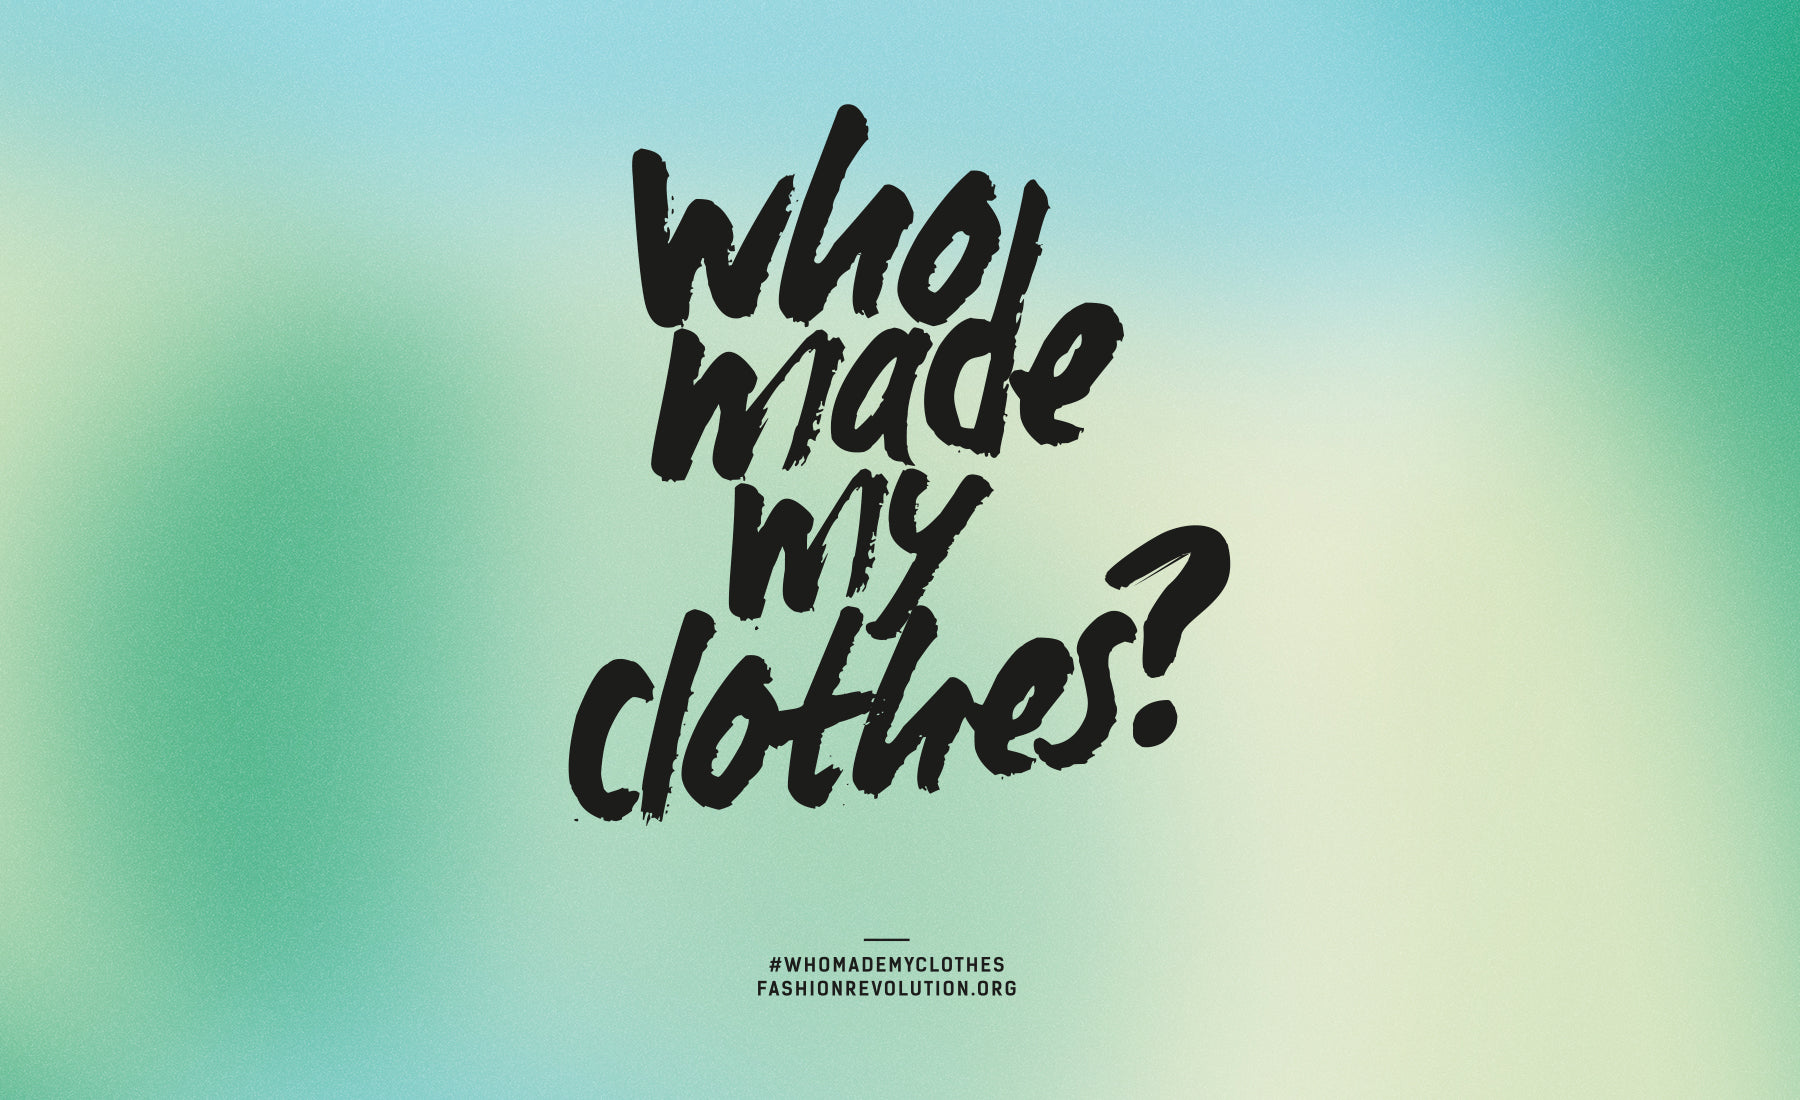 Who made my clothes? Read about the fashion revolution